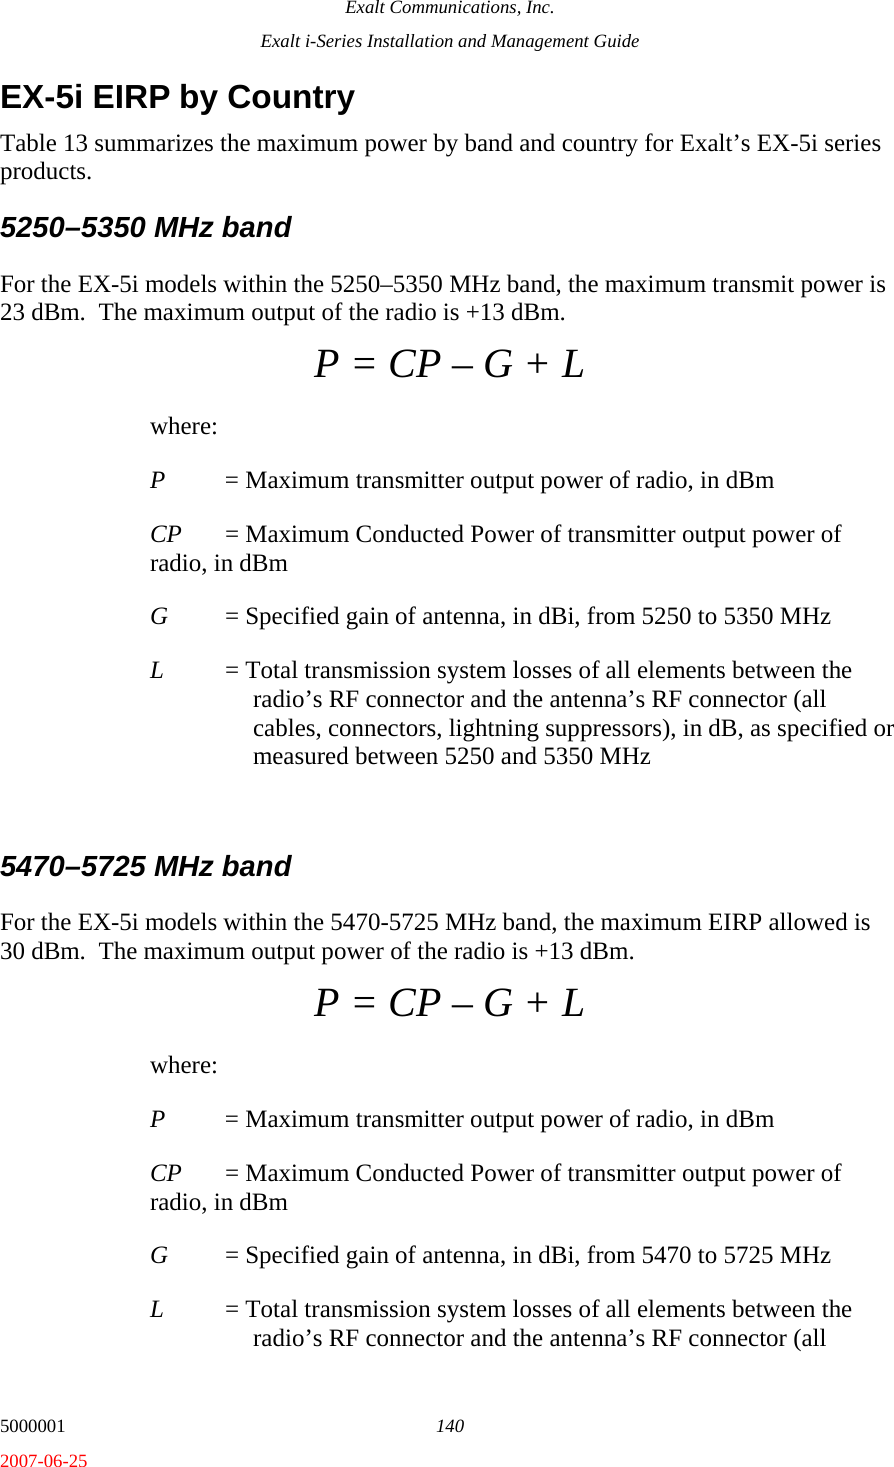 Exalt Communications, Inc. Exalt i-Series Installation and Management Guide 5000001  140 2007-06-25 EX-5i EIRP by Country Table 13 summarizes the maximum power by band and country for Exalt’s EX-5i series products.  5250–5350 MHz band For the EX-5i models within the 5250–5350 MHz band, the maximum transmit power is 23 dBm.  The maximum output of the radio is +13 dBm. P = CP – G + L where: P  = Maximum transmitter output power of radio, in dBm CP  = Maximum Conducted Power of transmitter output power of radio, in dBm G  = Specified gain of antenna, in dBi, from 5250 to 5350 MHz L  = Total transmission system losses of all elements between the radio’s RF connector and the antenna’s RF connector (all cables, connectors, lightning suppressors), in dB, as specified or measured between 5250 and 5350 MHz  5470–5725 MHz band For the EX-5i models within the 5470-5725 MHz band, the maximum EIRP allowed is 30 dBm.  The maximum output power of the radio is +13 dBm.   P = CP – G + L where: P  = Maximum transmitter output power of radio, in dBm CP  = Maximum Conducted Power of transmitter output power of radio, in dBm G  = Specified gain of antenna, in dBi, from 5470 to 5725 MHz L  = Total transmission system losses of all elements between the radio’s RF connector and the antenna’s RF connector (all 